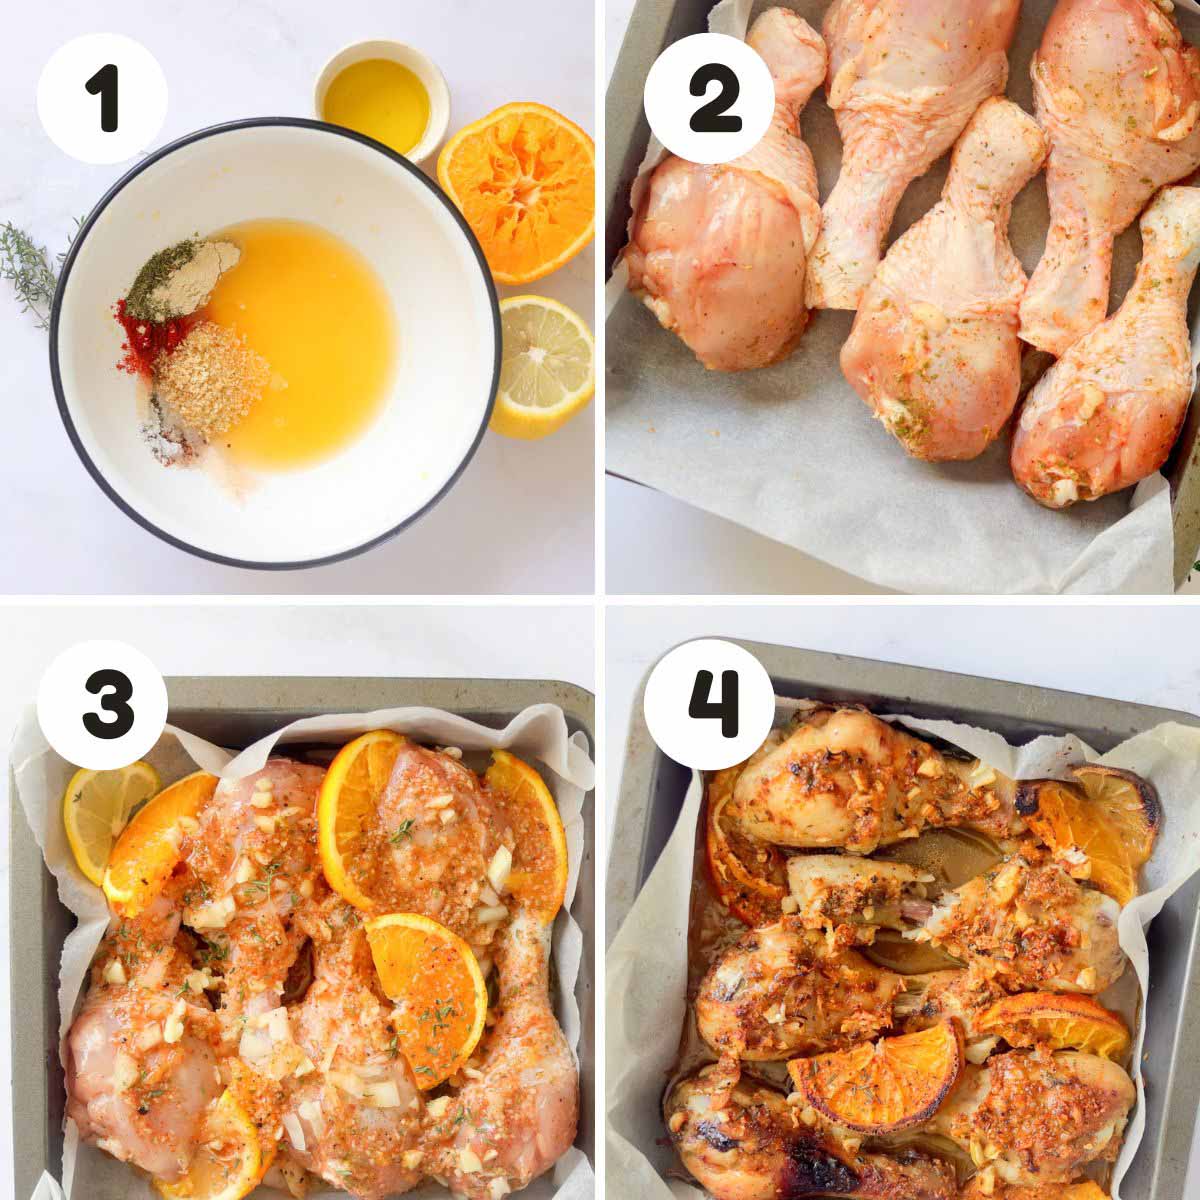 Steps to make the roasted chicken.